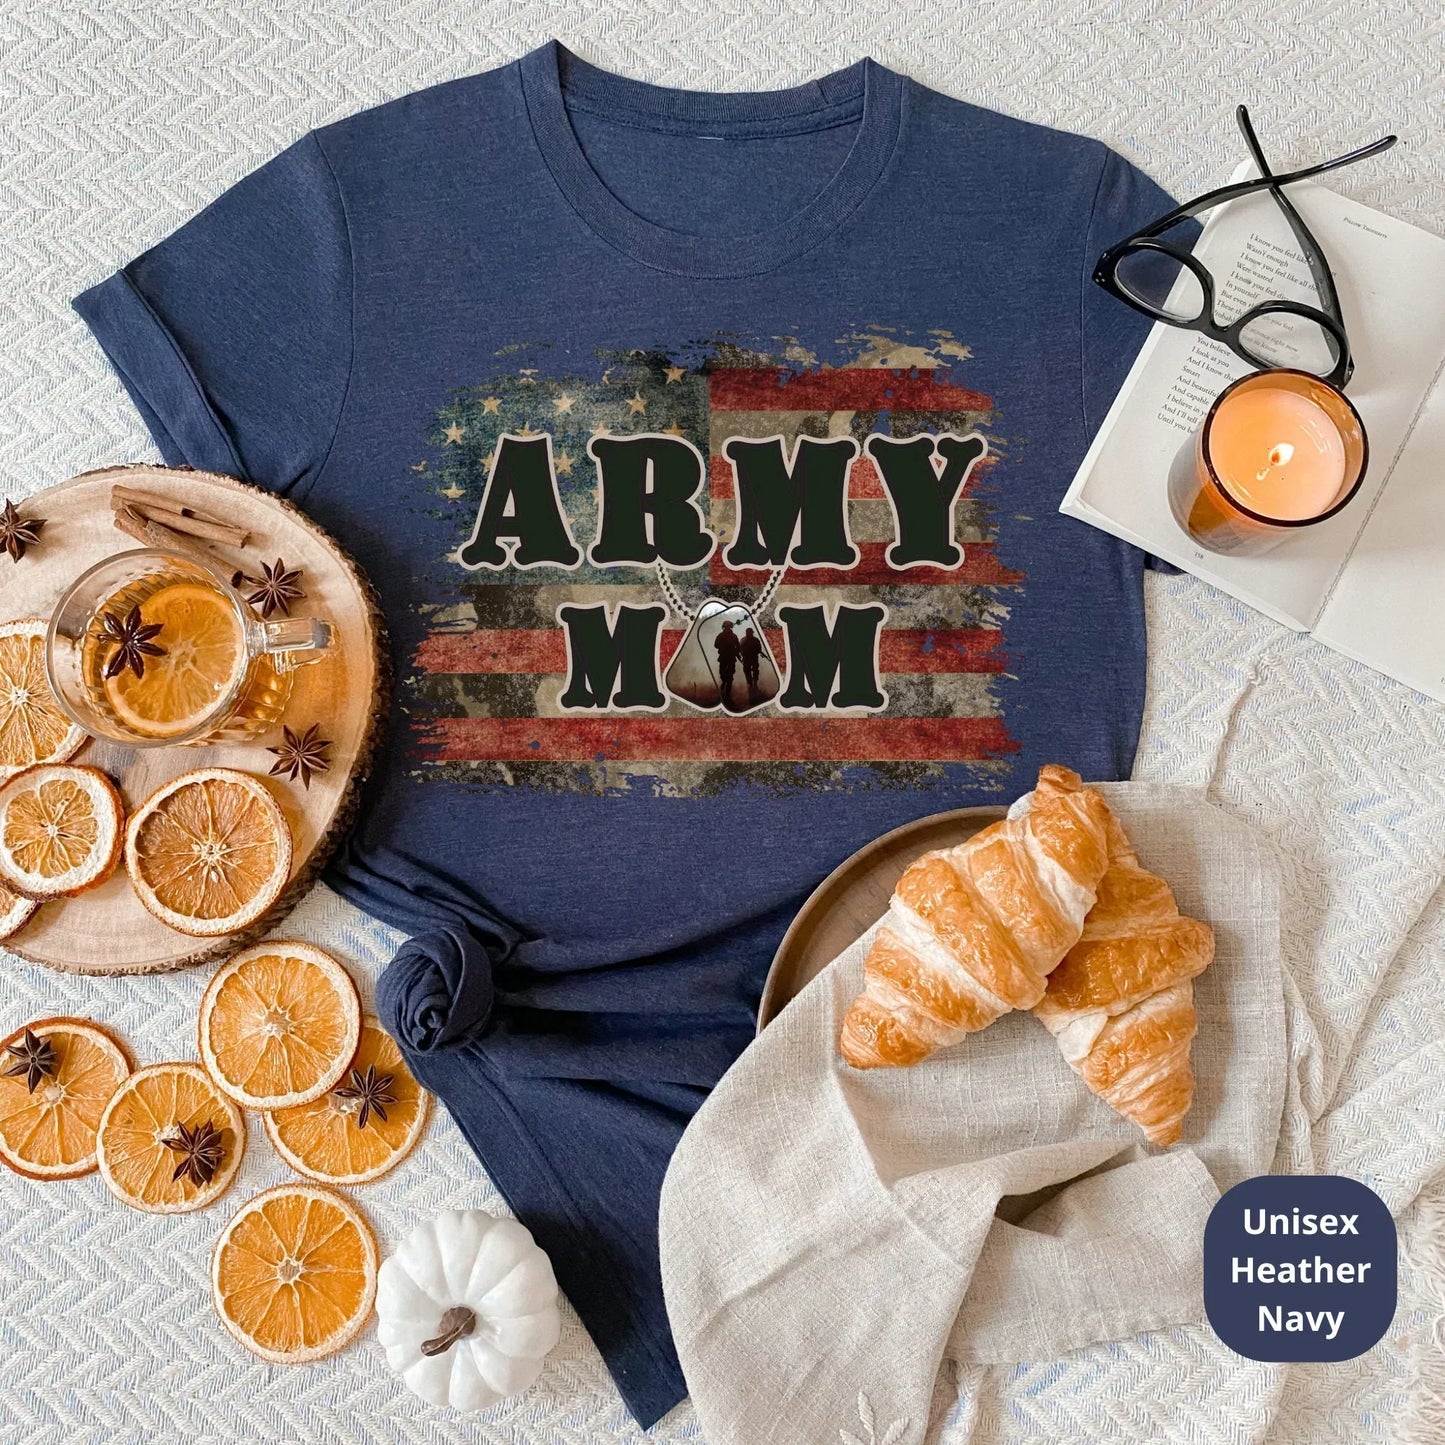 Army Mom Shirt, Military Mom Shirt, Military Wife Sweatshirt, Army Mom Gift, Air Force Mom, Support our troops, Marine Coast guard, Navy Mom